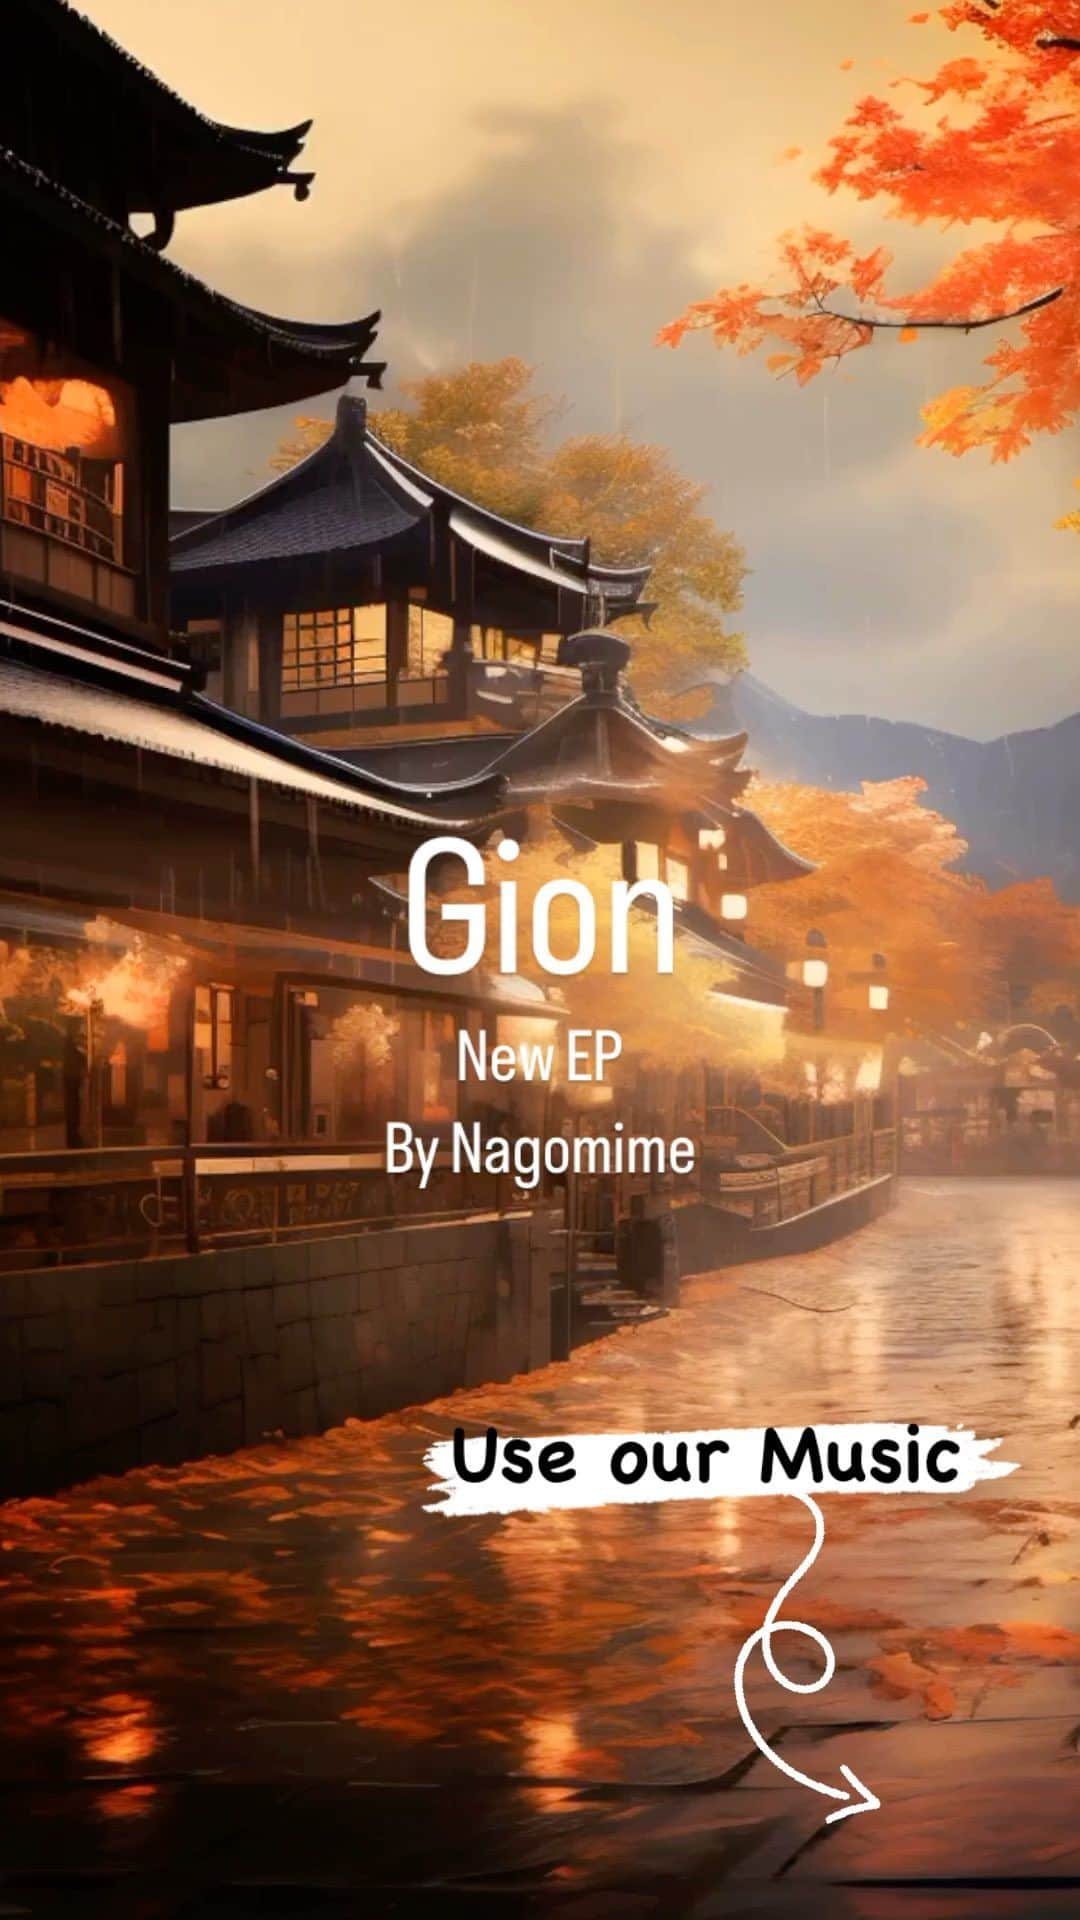 Cafe Music BGM channelのインスタグラム：「Unlocking the Mysteries of Nagomime's Gion Album - A Visual Journey 🌟🔍 #Nagomime #Gion #Electronic  💿 Listen Everywhere: https://bgmc.lnk.to/es5zelLU 🎵 Nagomime: https://bgmc.lnk.to/wfUIjdc5  ／ 🎂 New Release ＼ November 3rd In Stores 🎧 Gion By Nagomime  #EverydayMusic #Nagomime #Gion #ElectronicMusic #VisualJourney #NewMusicRelease #ExploreSounds #MysteriesUnveiled」